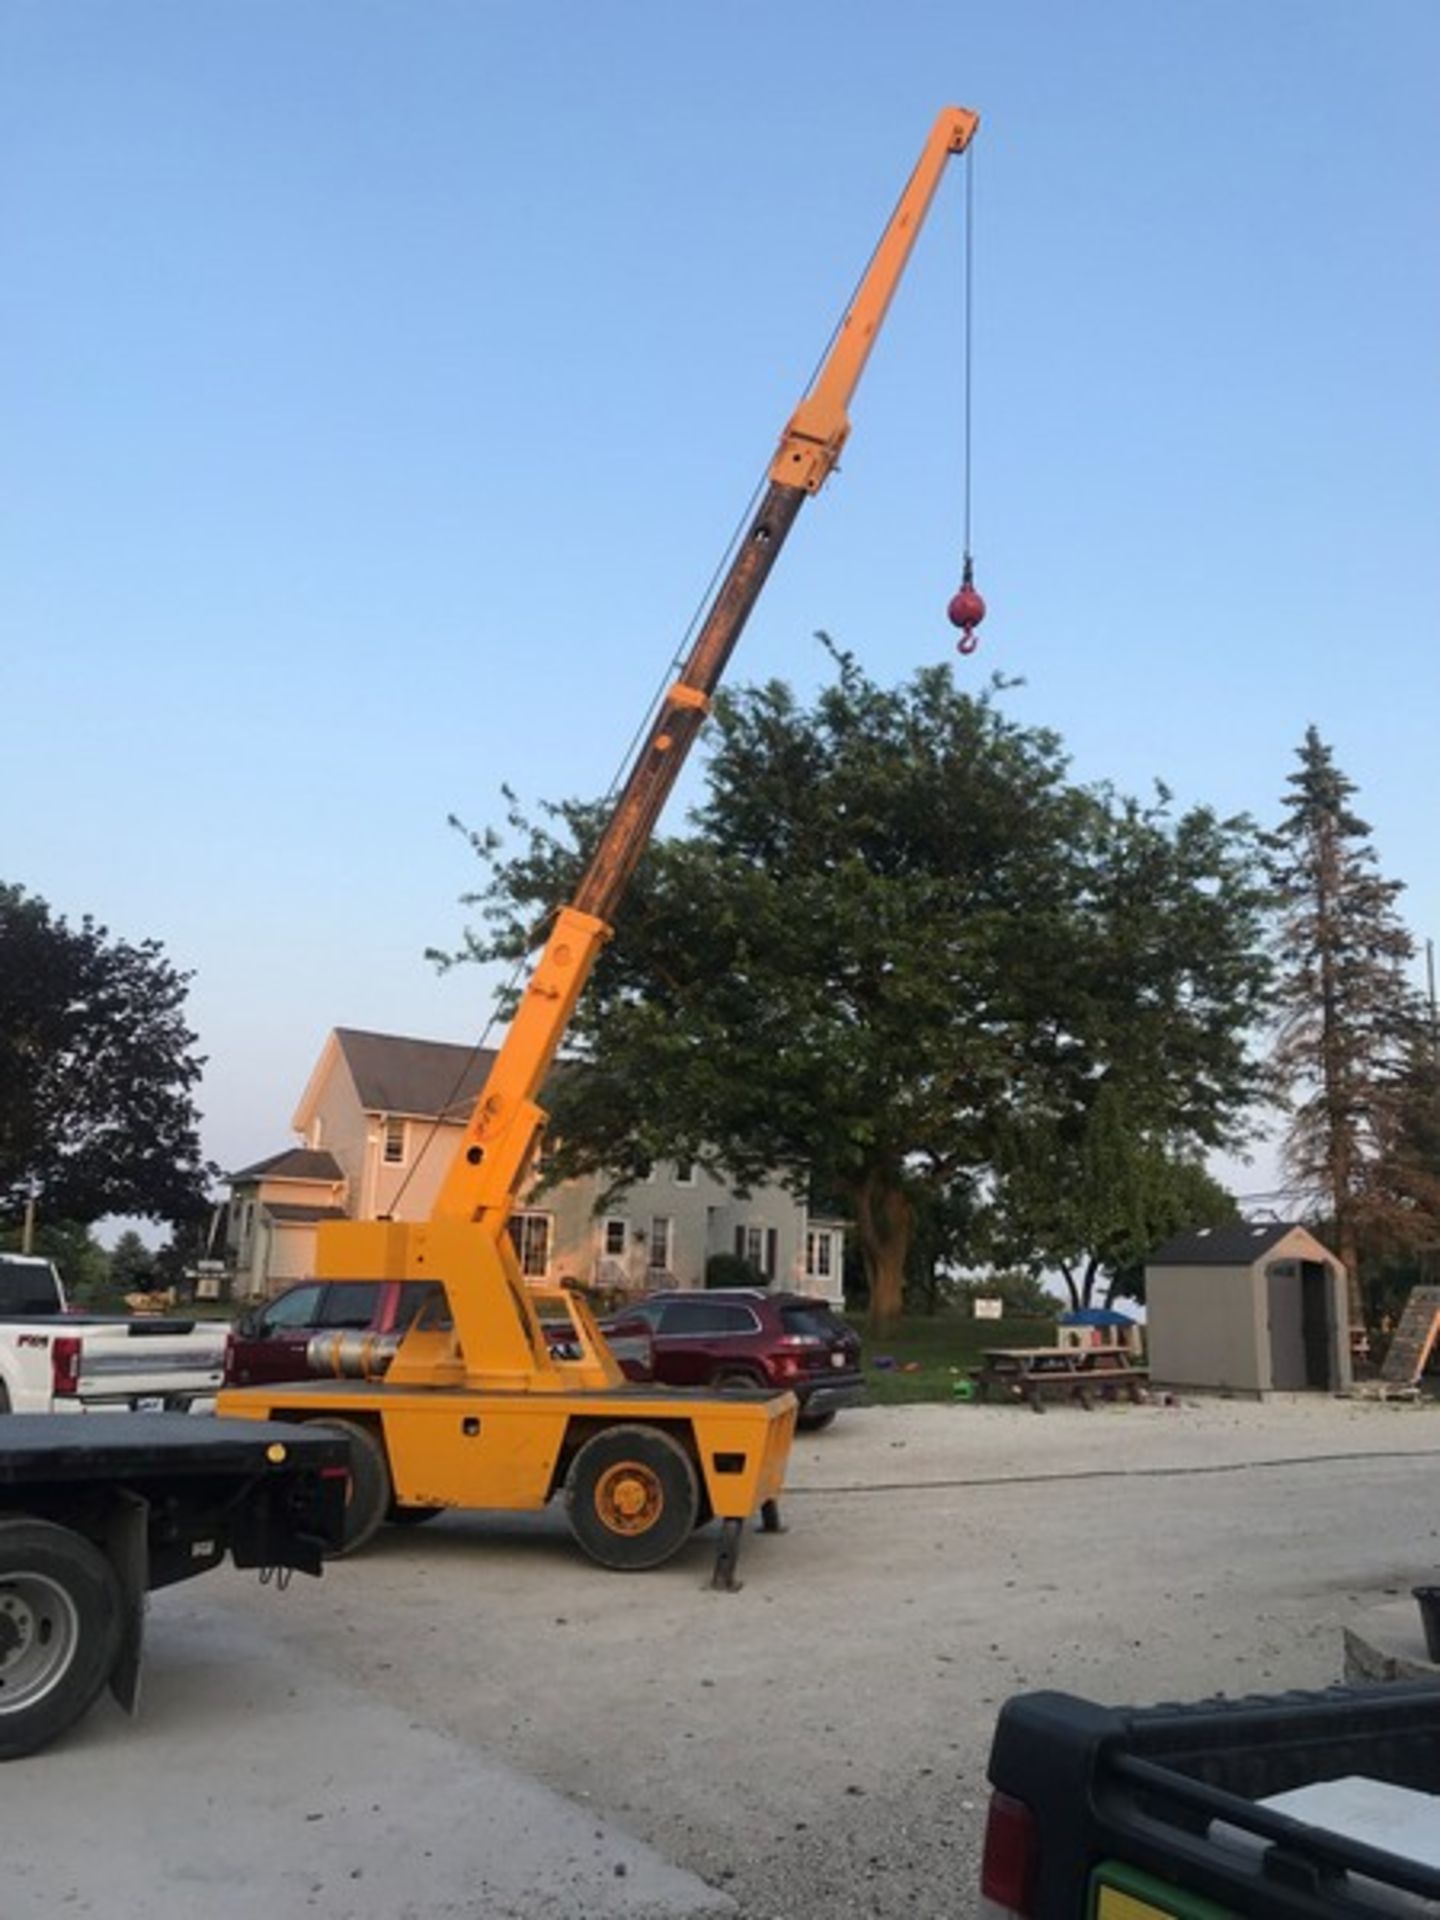 Broderson Carry Deck Crane, Model IC 80 1D, S/N 131716, Propane, 35 Foot Boom with Jib (Located - Image 5 of 5